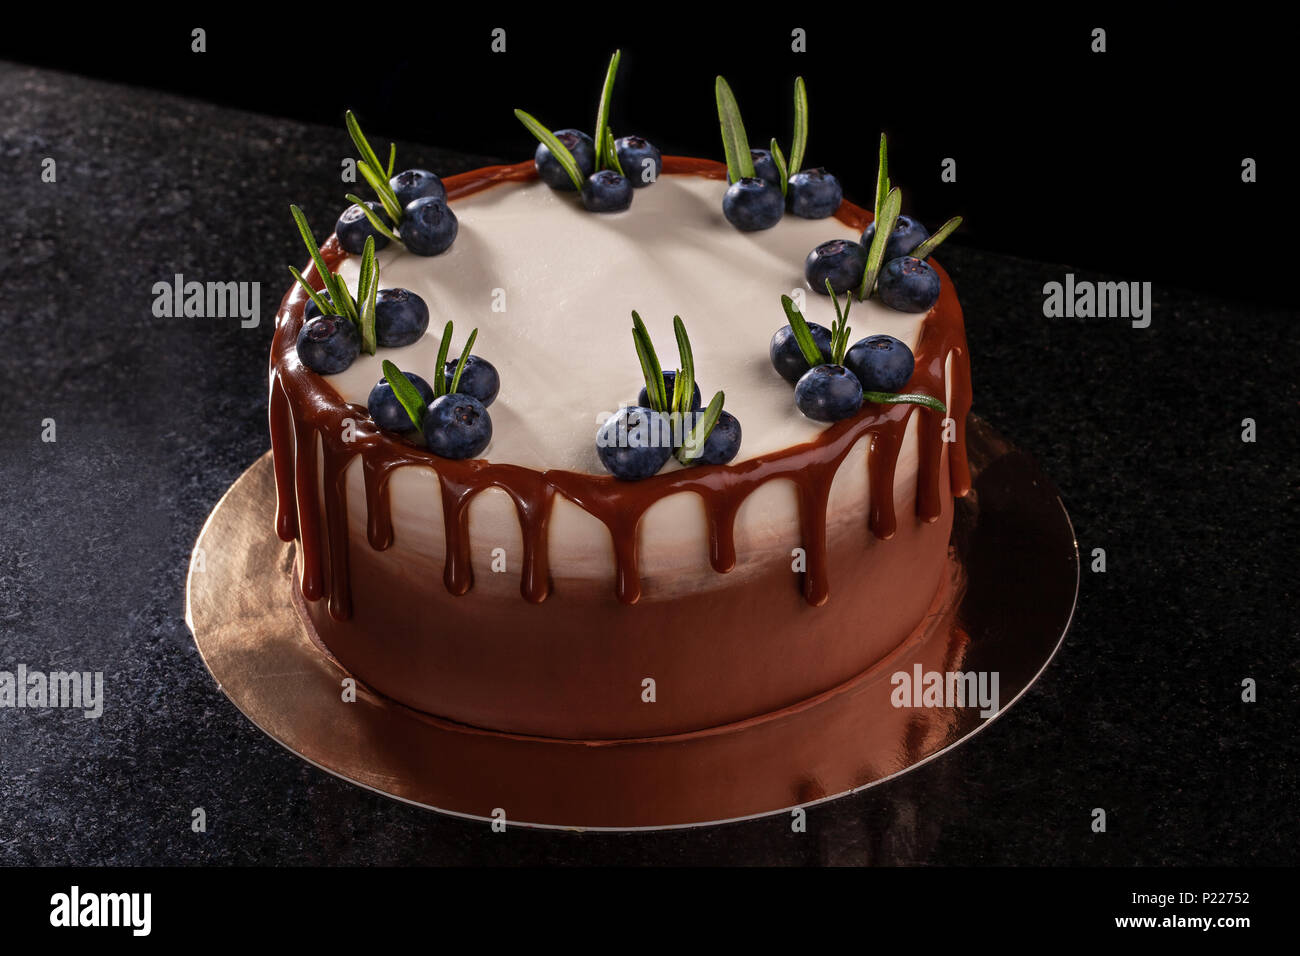 Chocolate cake with blueberries on a black background, decorated with ...